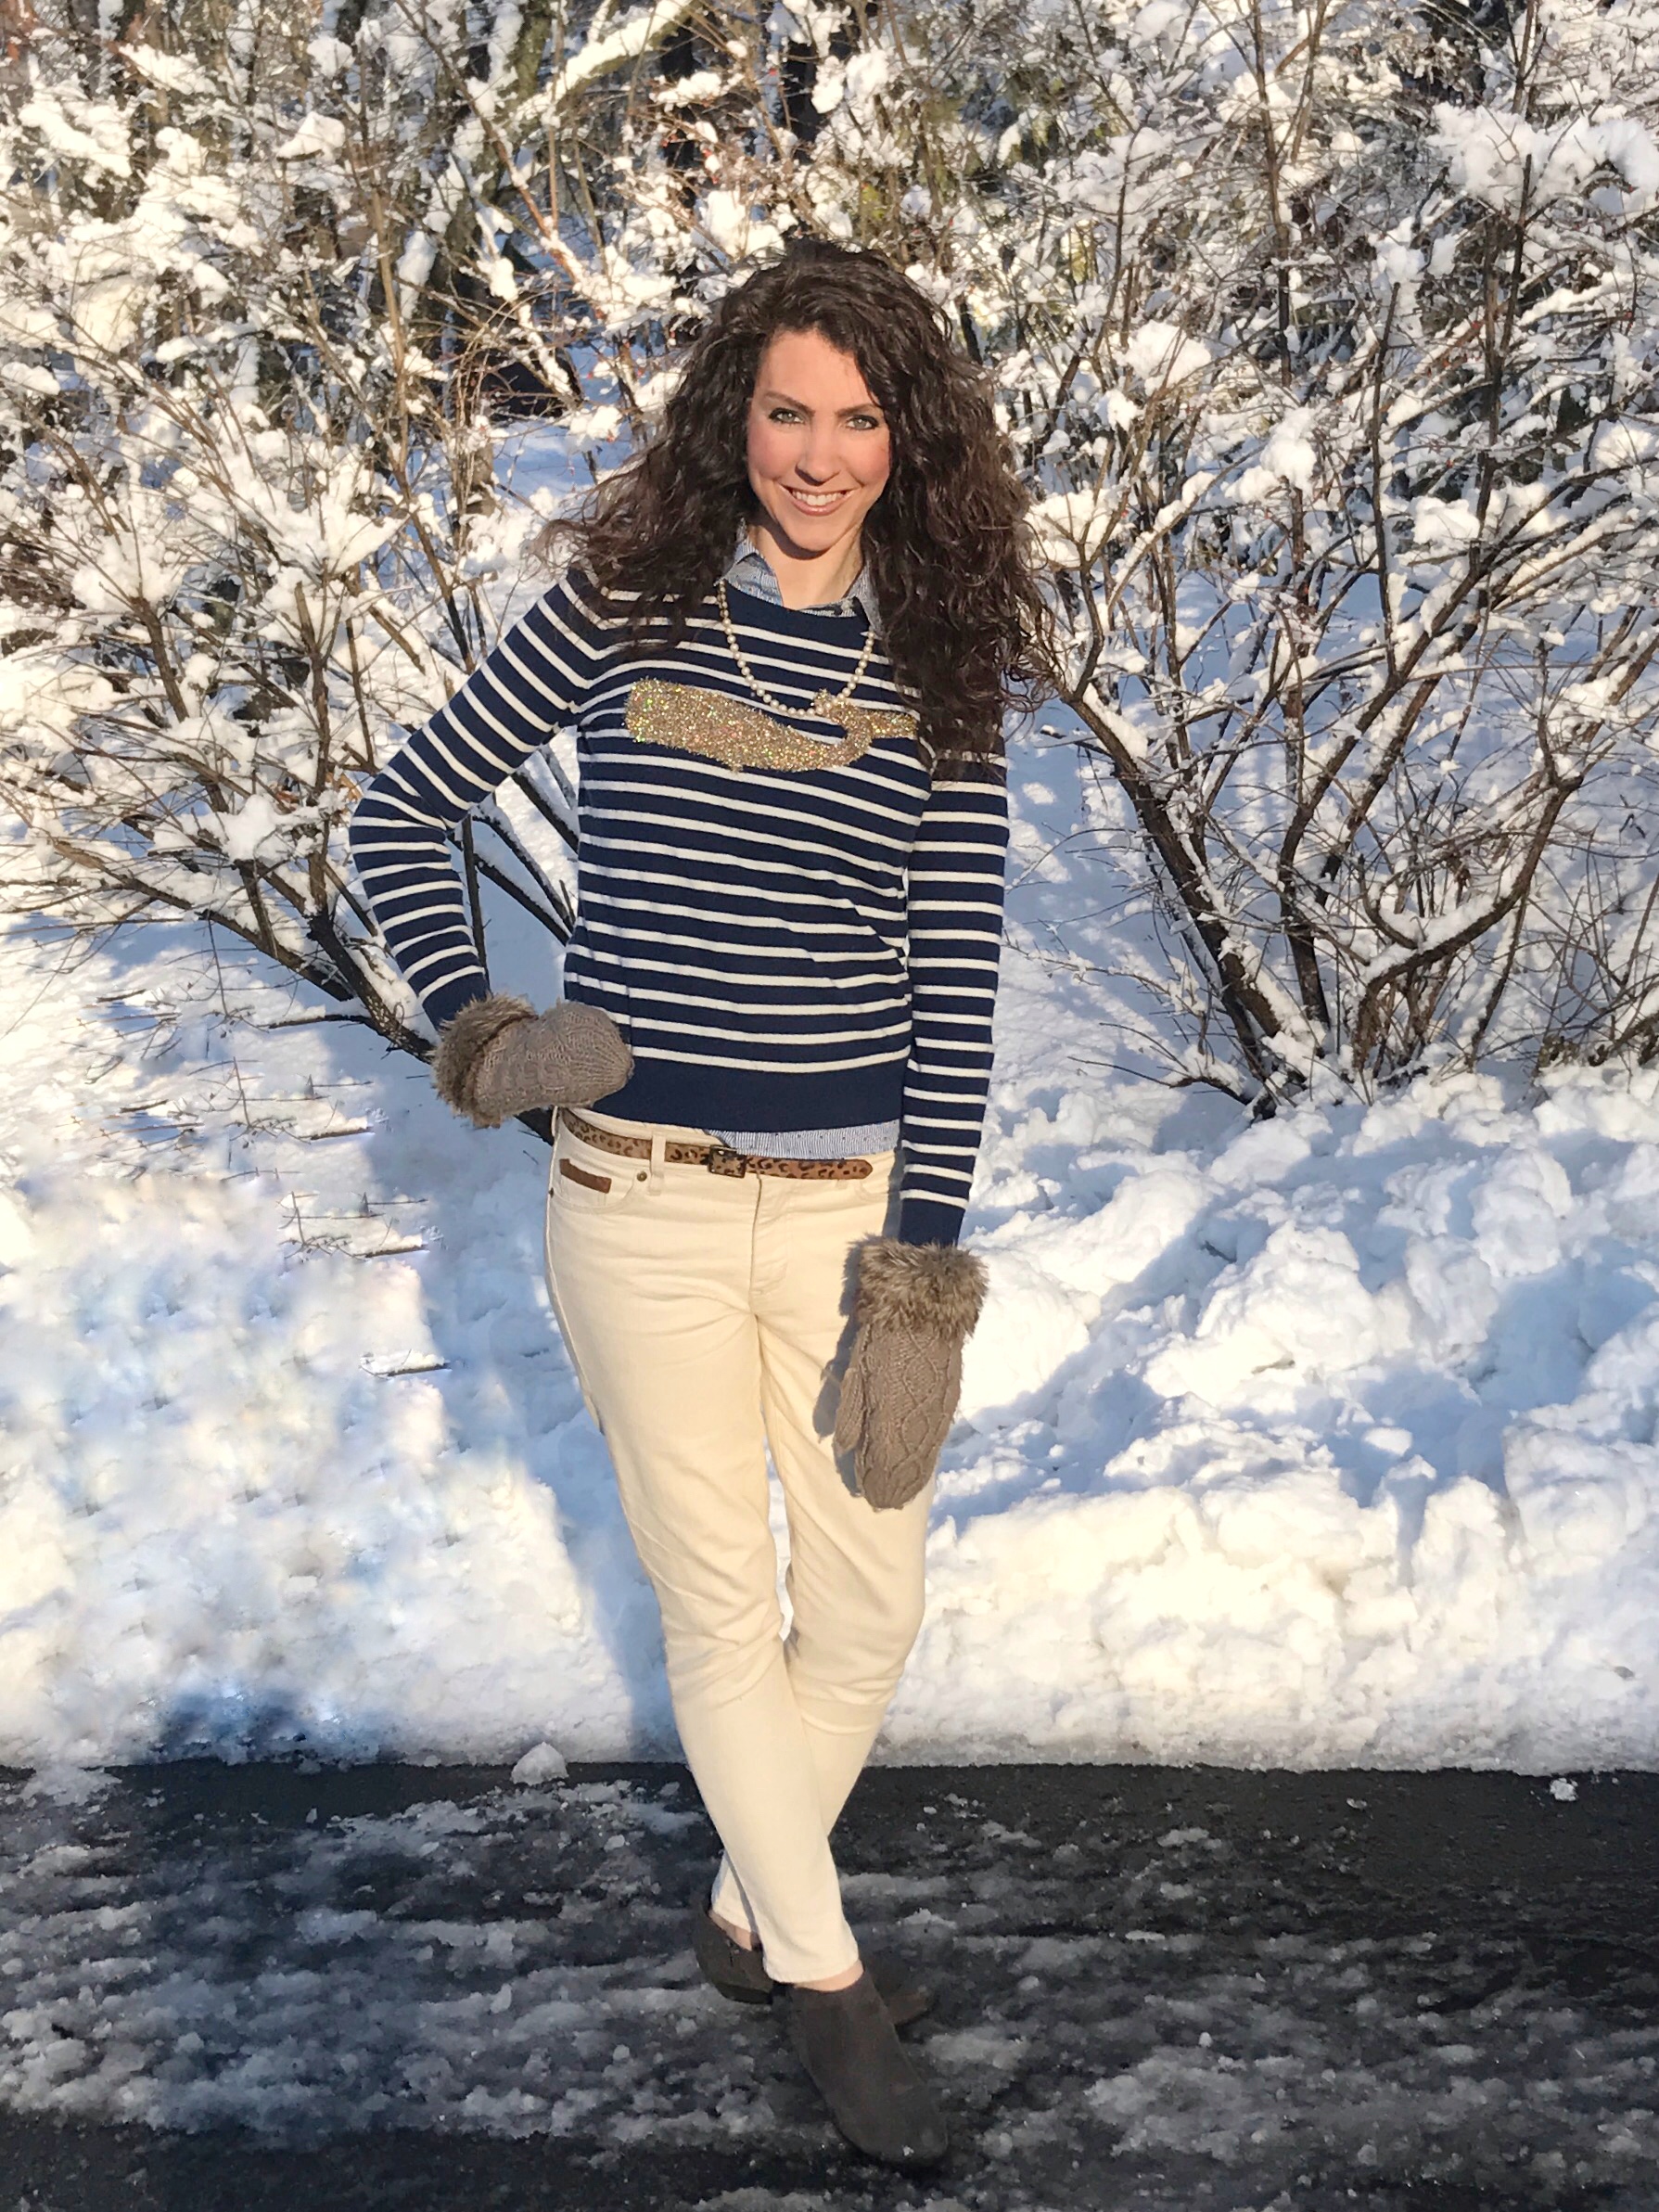 Talbots Whale Sweater and Ivory Ralph Lauren Jeans with Jack Rogers Booties. From the Closet - From the Family With Love